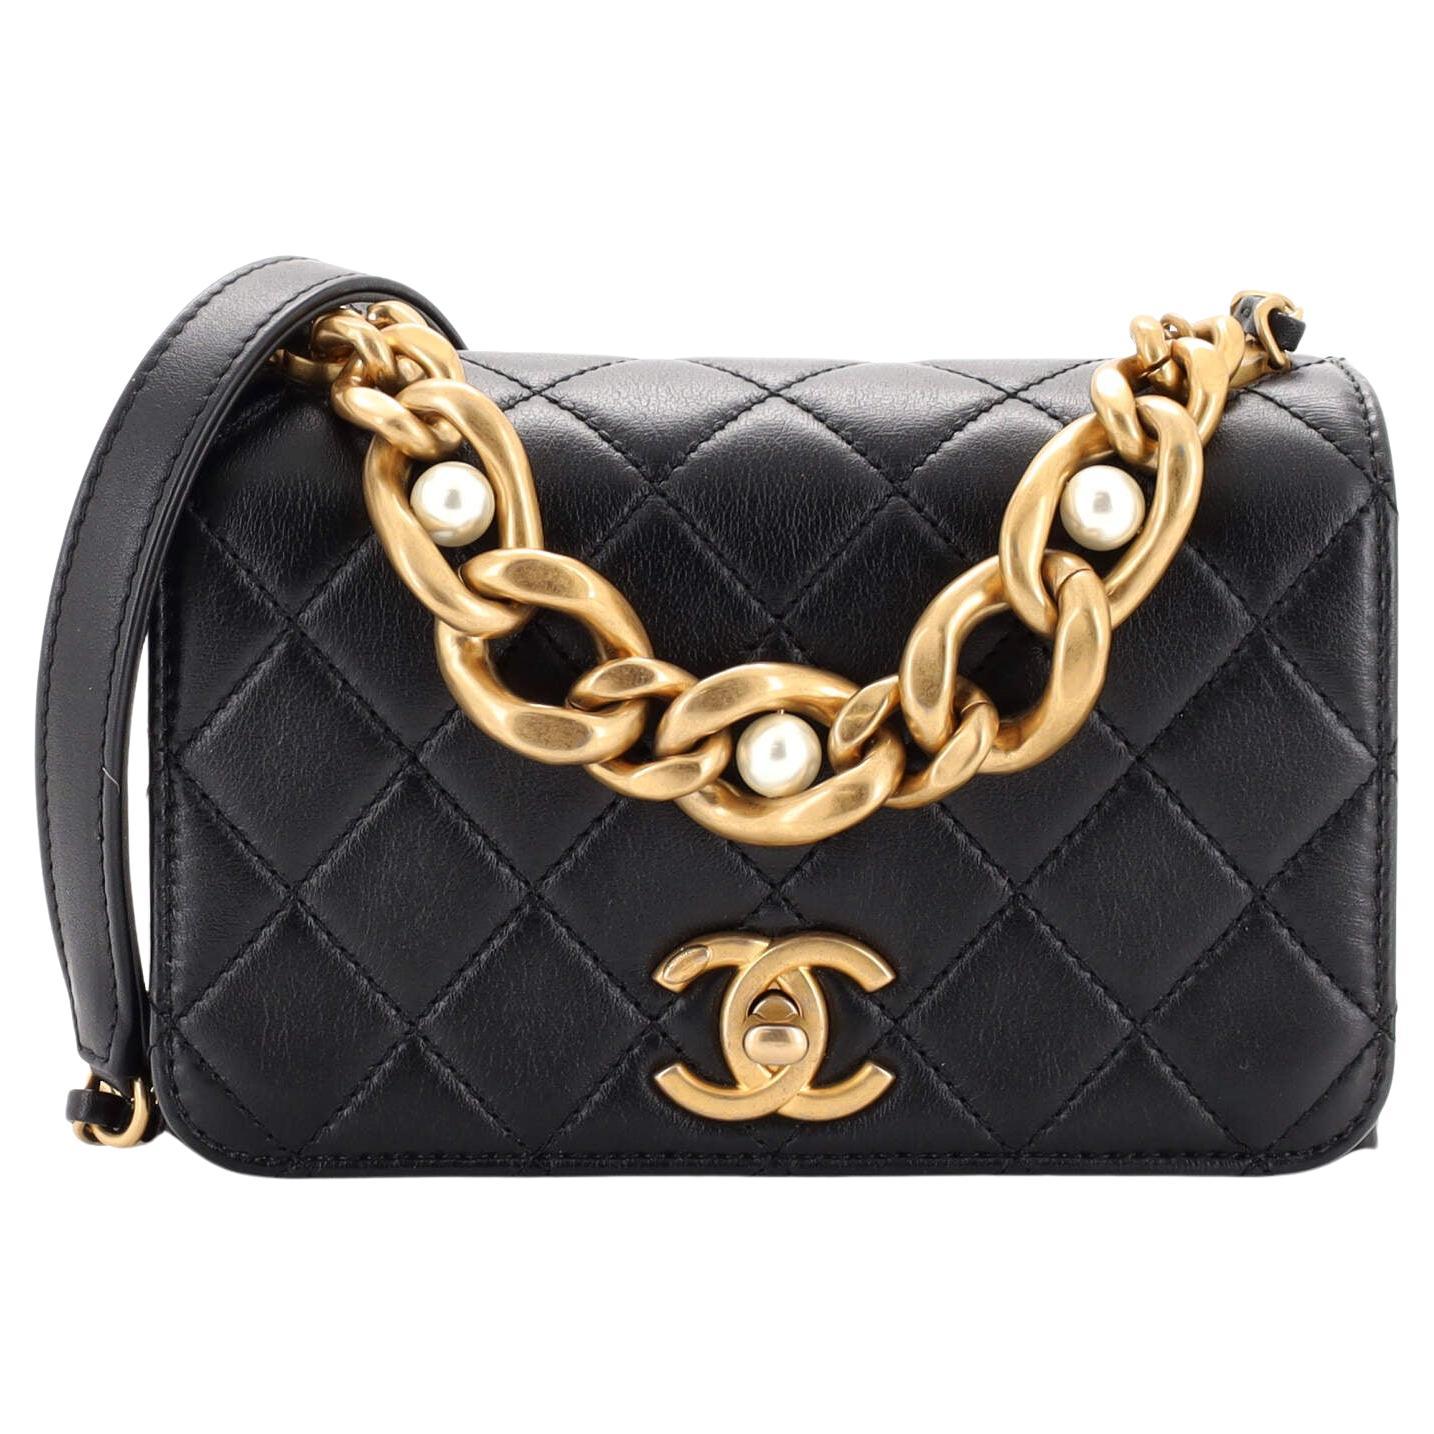 Chanel Chain Around Single Flap Bag in Pearly Metallic Calfskin with So  Black Hardware